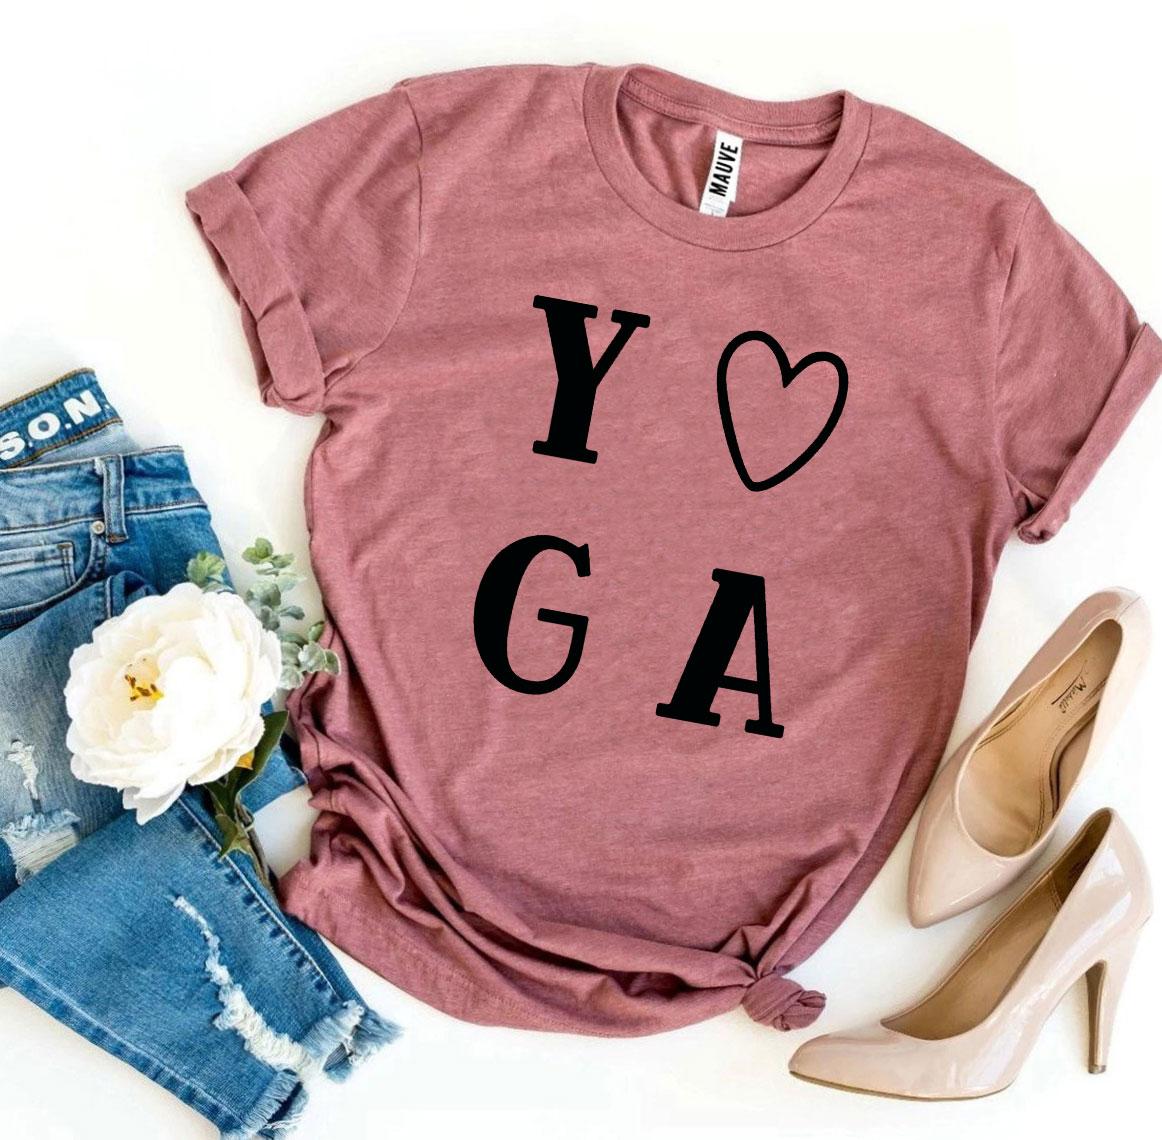 I Love Yoga, Heart T-shirt in 9 colors